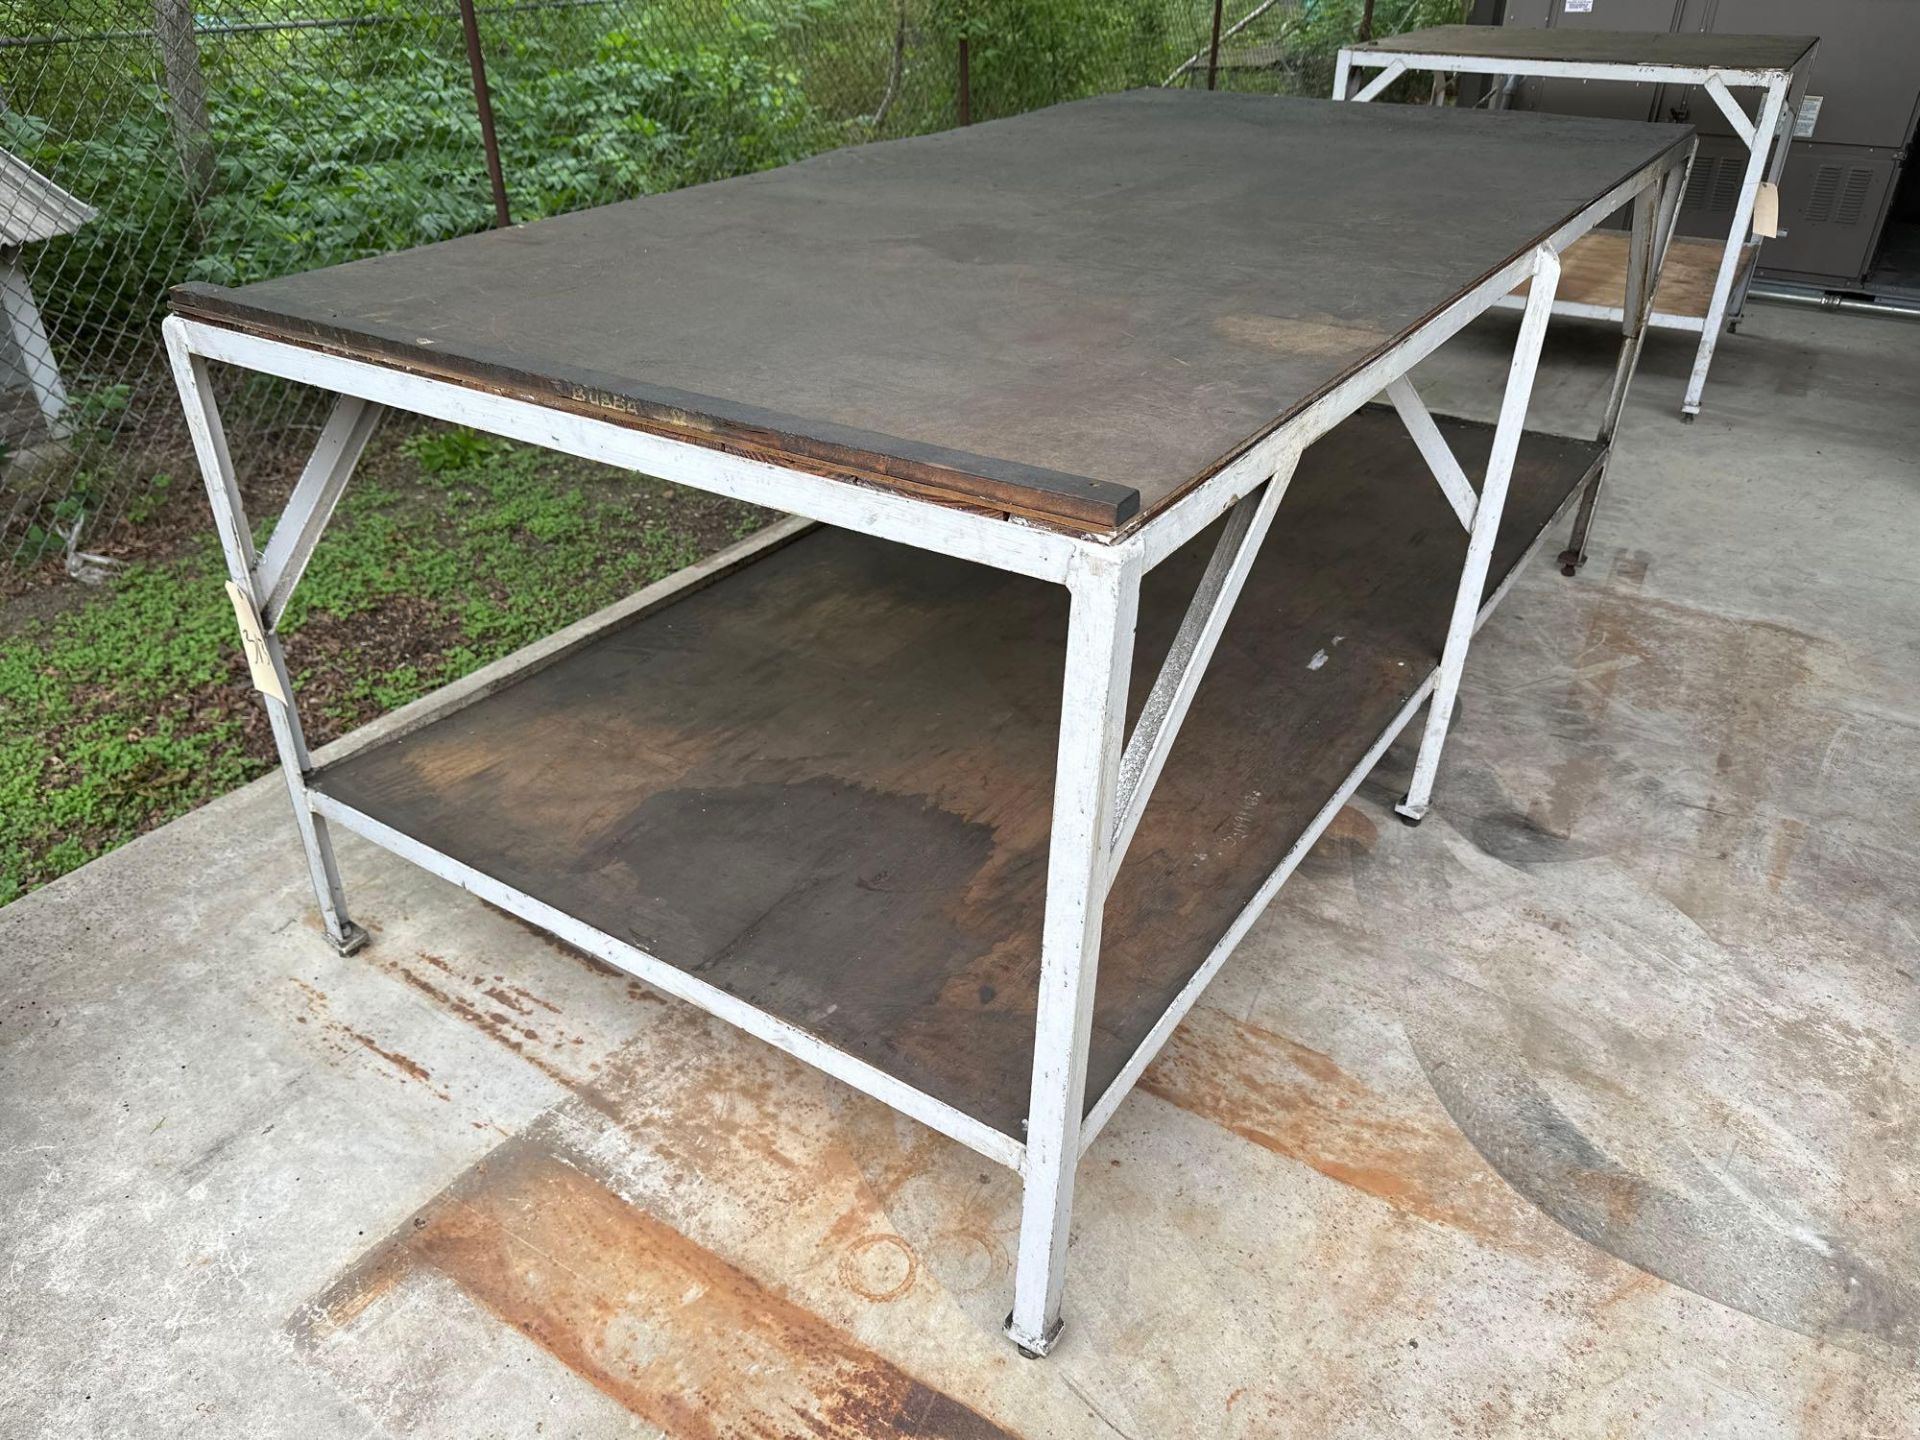 Metal Table with Wooden Top 96” X 48” X 38” - Image 4 of 4